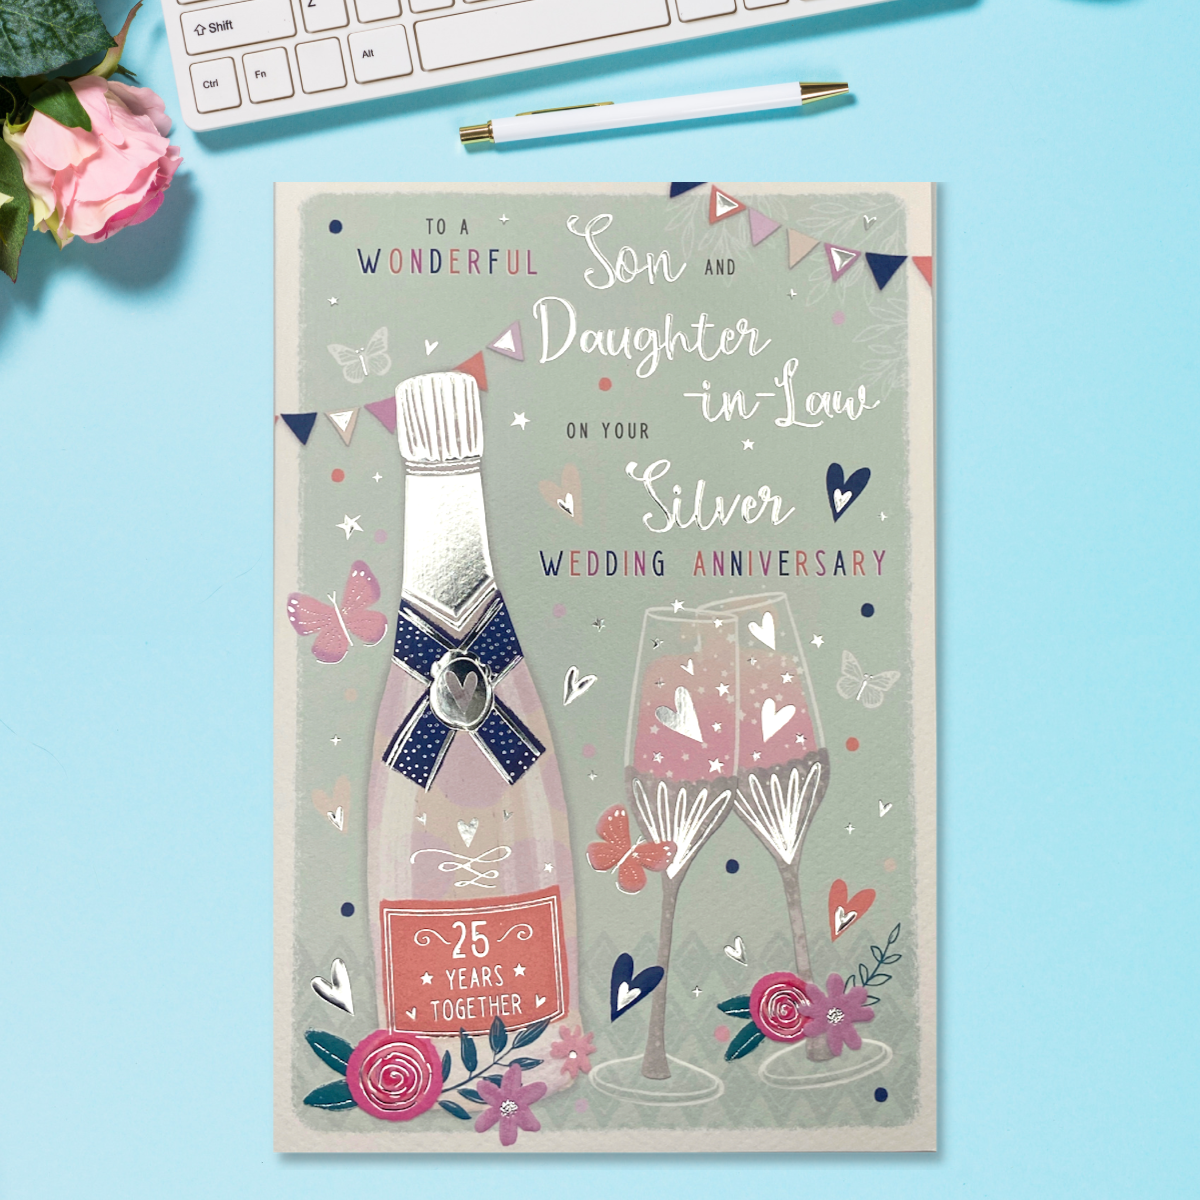 Son & Daughter-In-Law Silver Wedding Anniversary Card - 25th Champagne